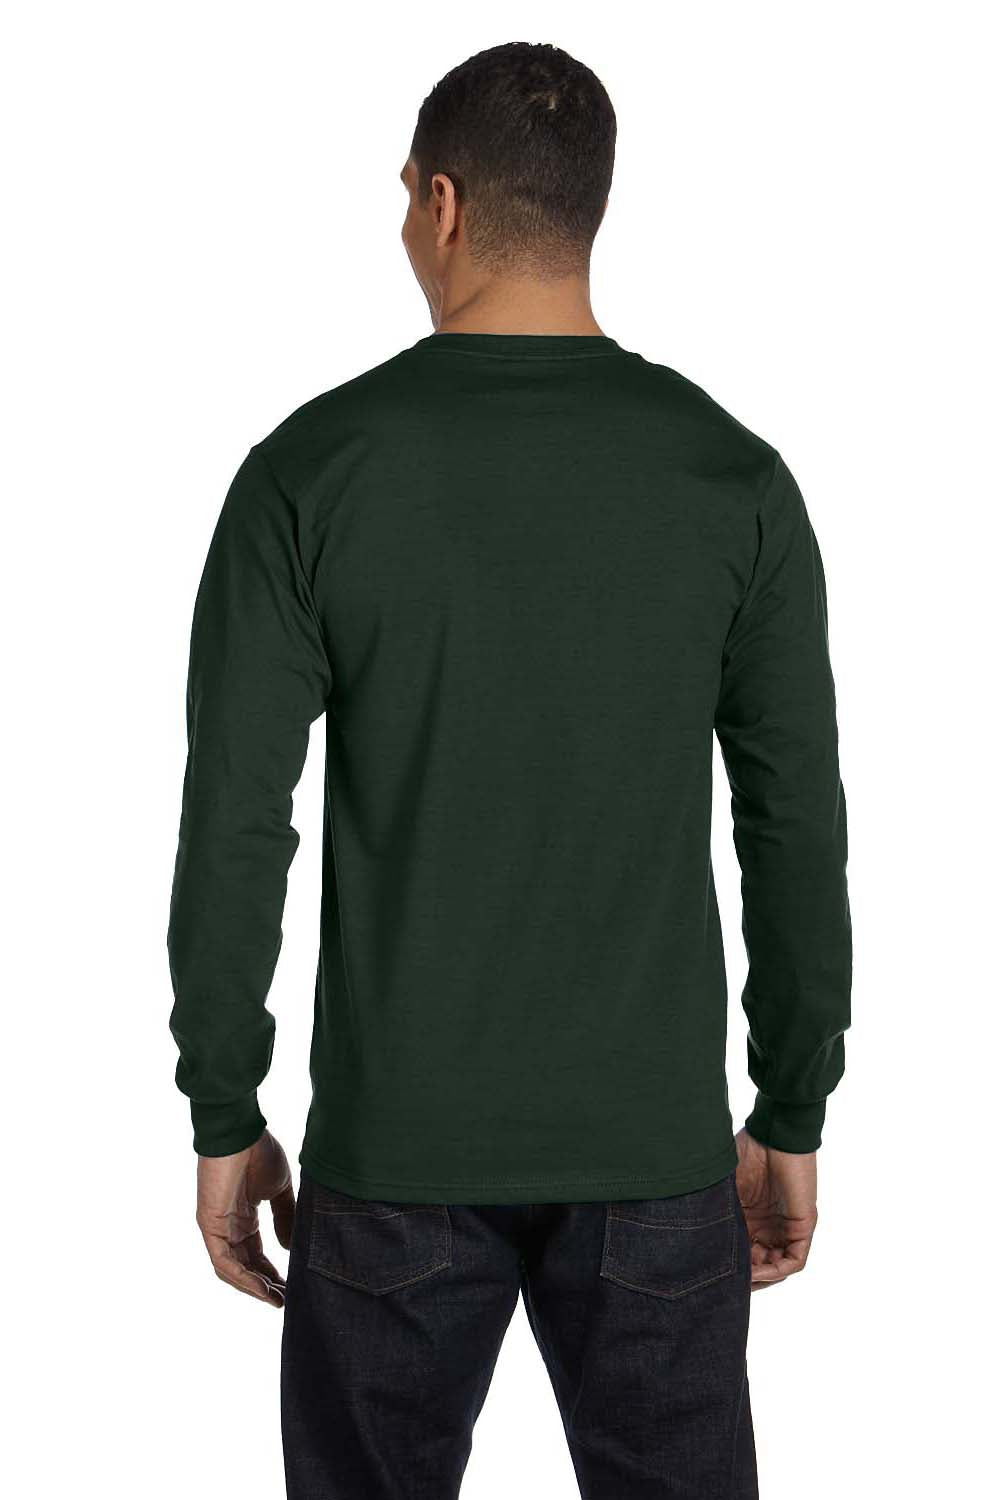 Hanes 5186 Mens Beefy-T Long Sleeve Crewneck T-Shirt Forest Green Back